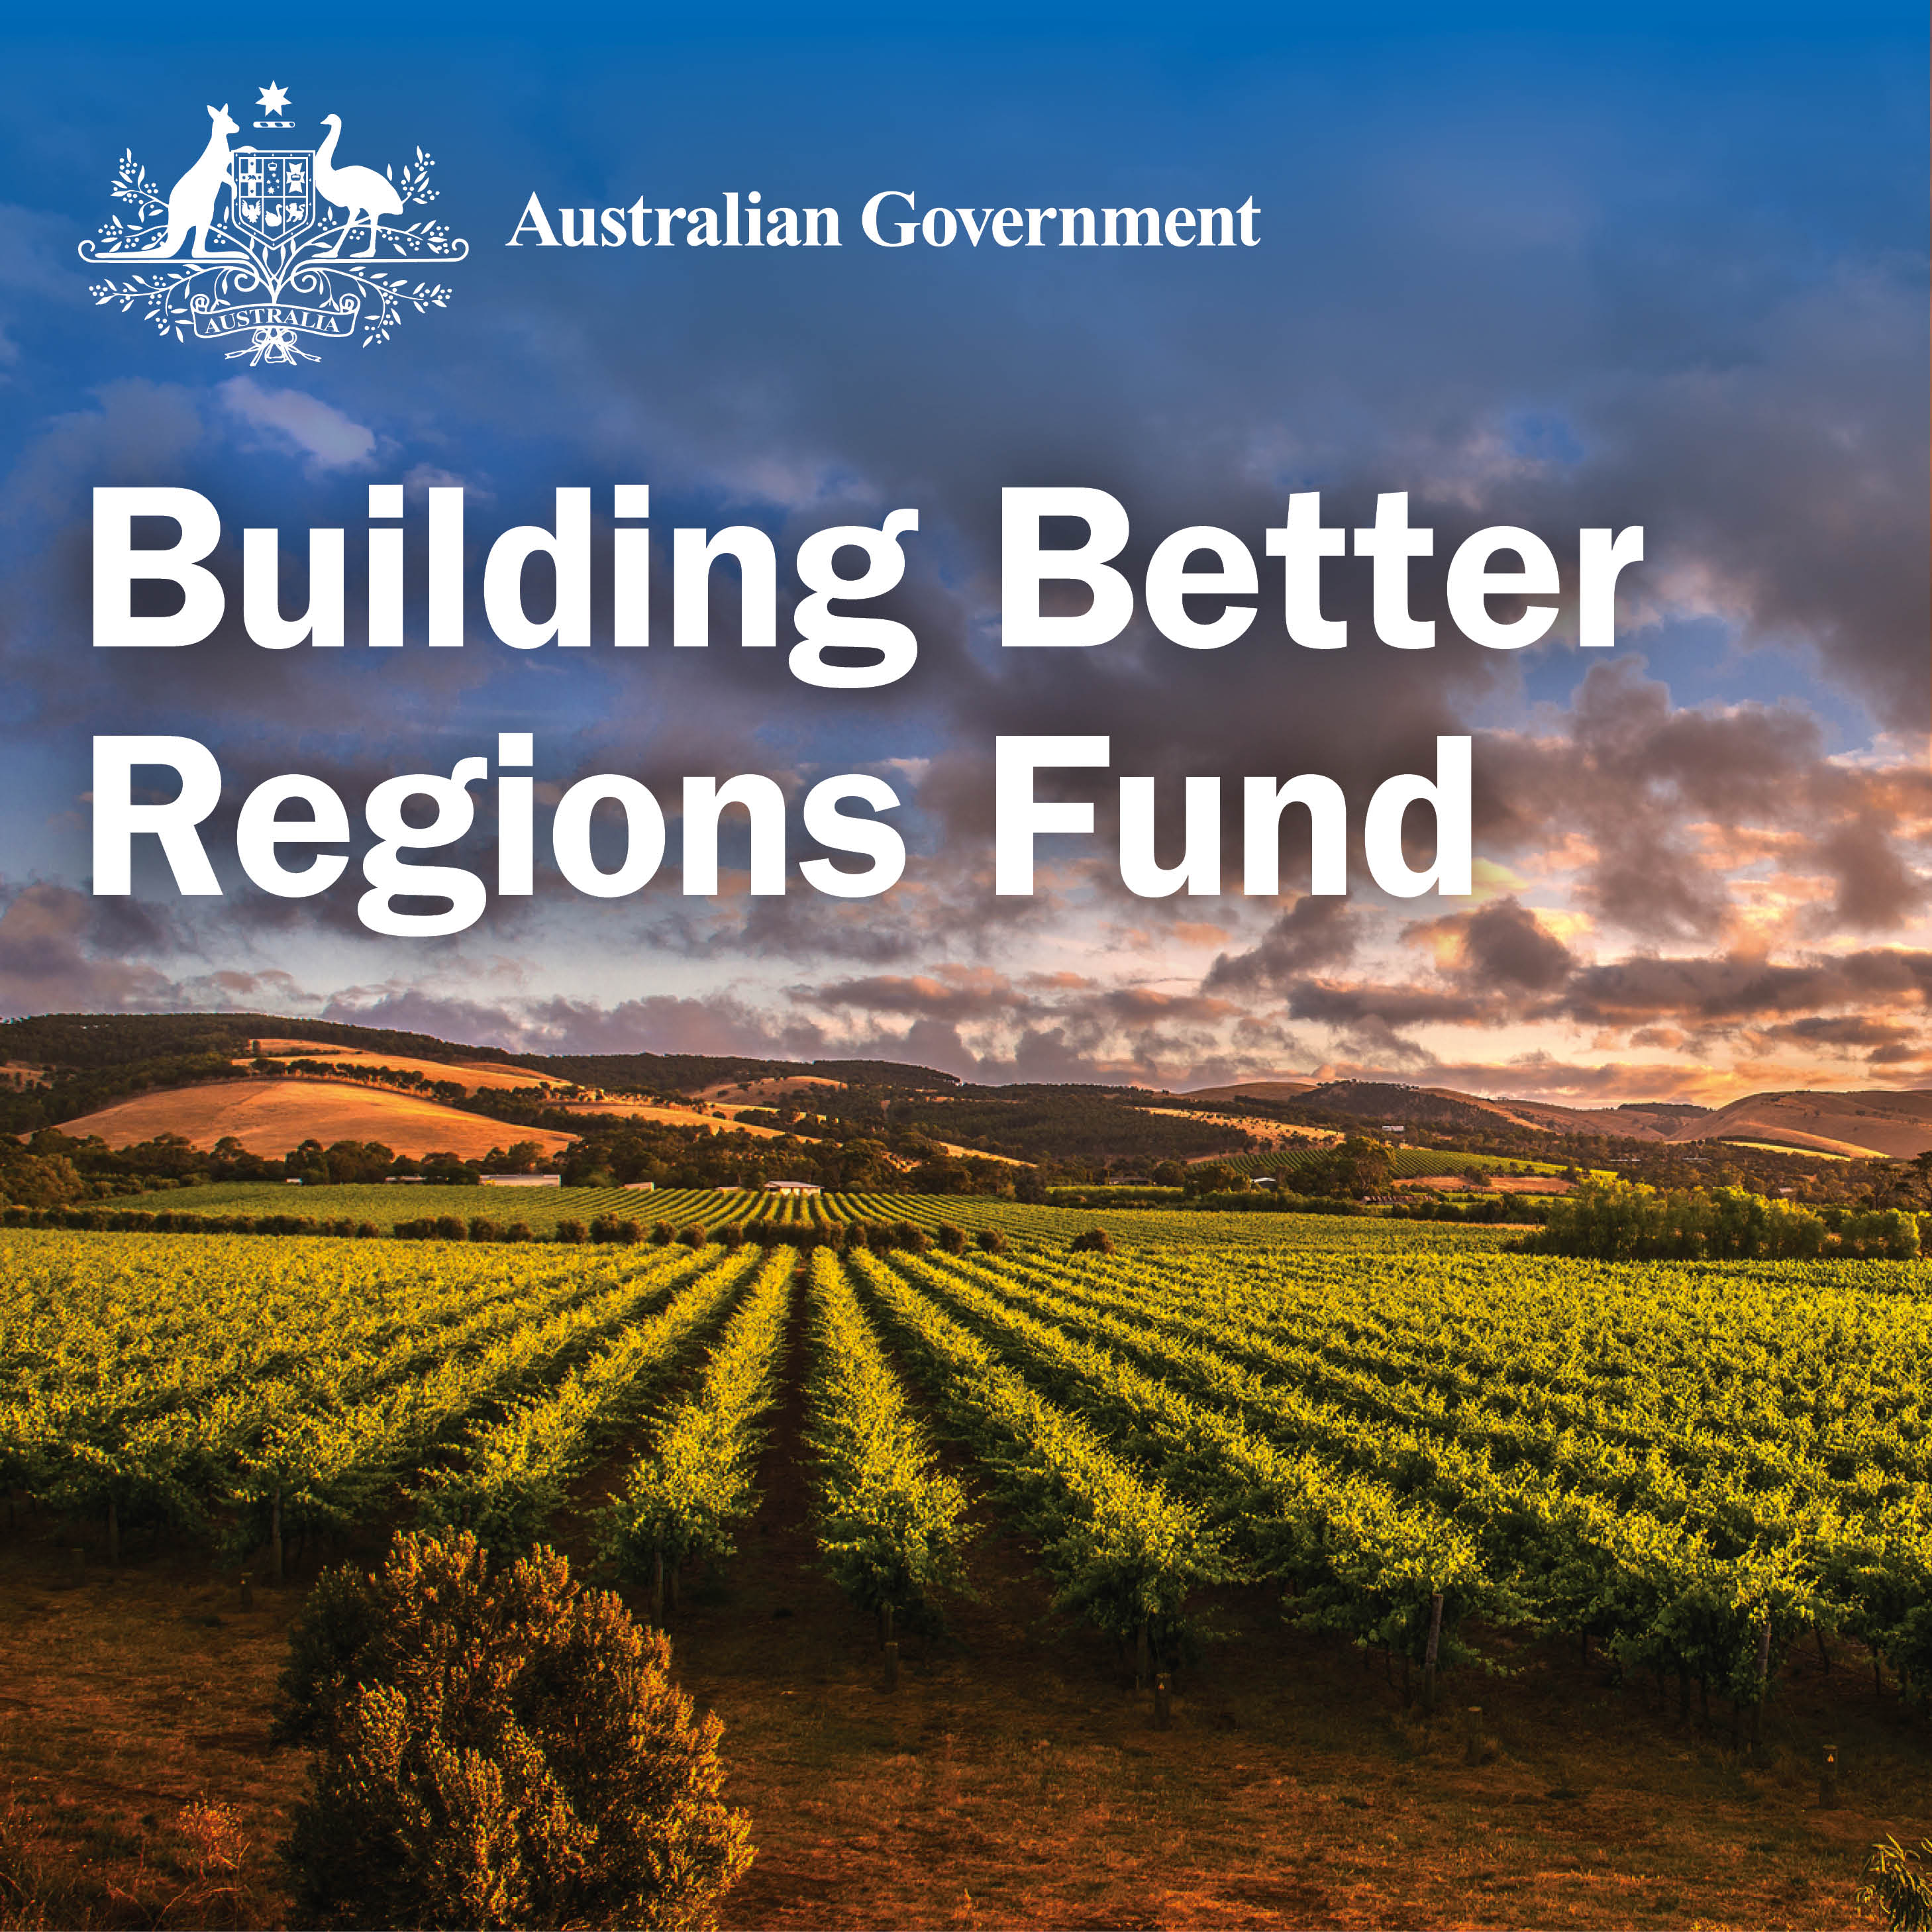 Second round of the Building Better Regions Fund open to the Barker community